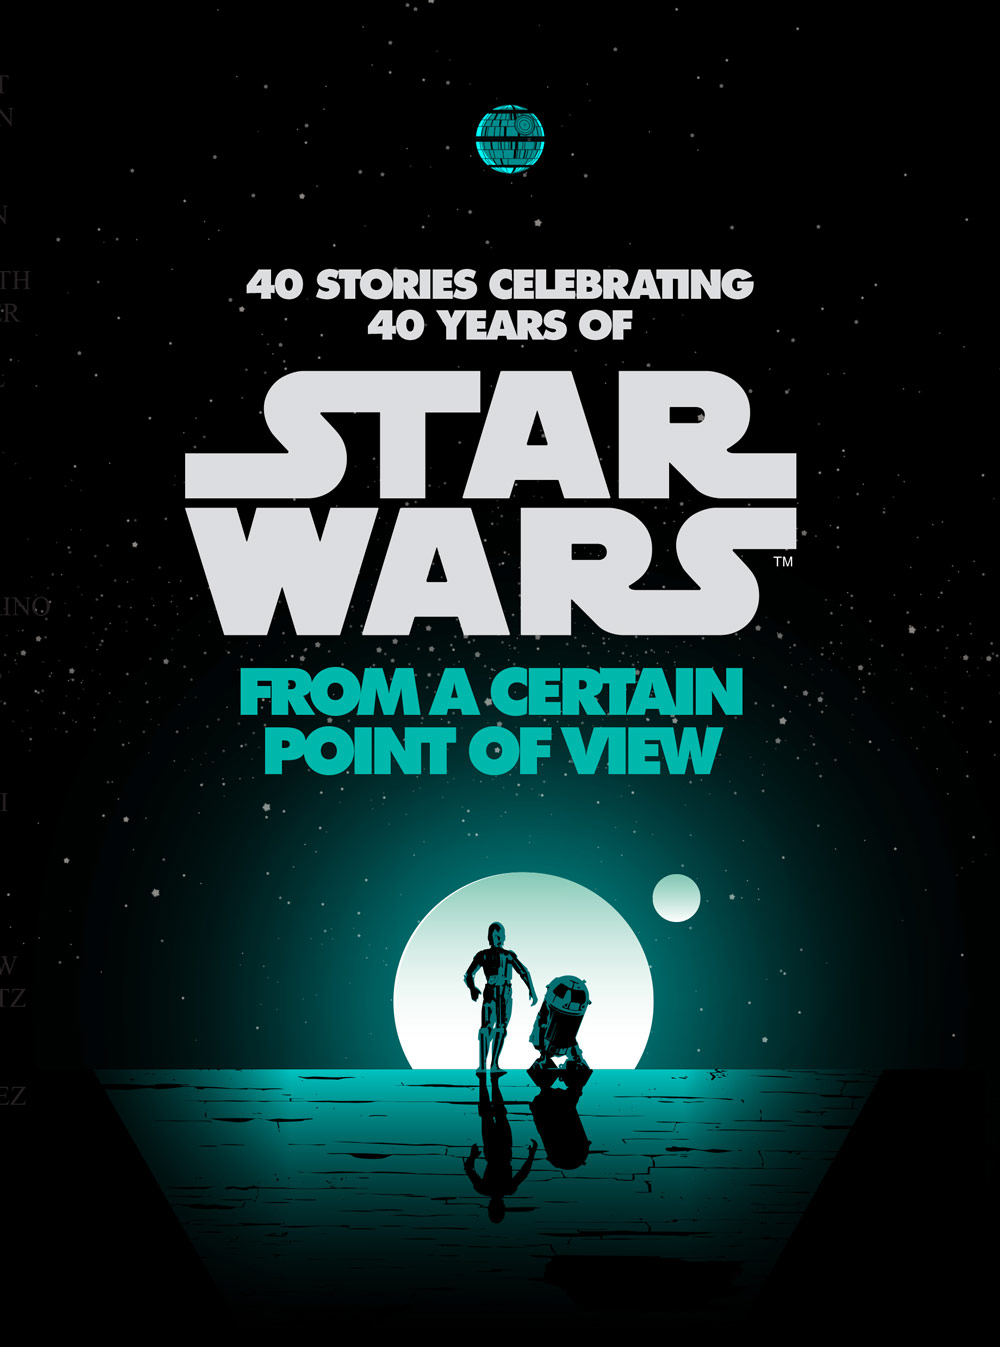 Plik:Star-Wars-From-a-certain-point-of-view.jpg